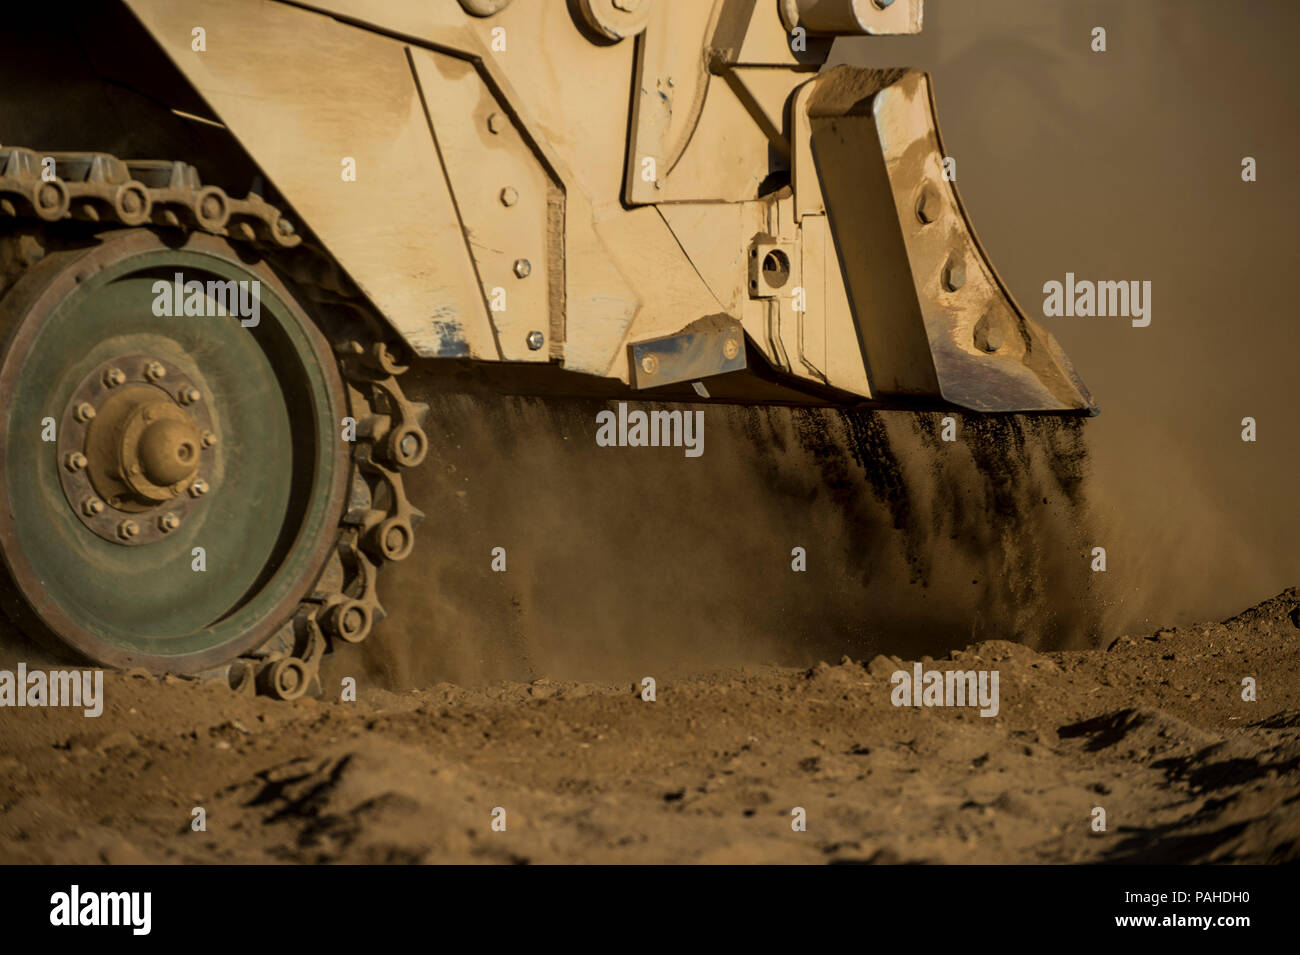 U.S. Army Reserve combat engineer Soldiers use an M9 Armored Combat Earthmover to clear dirt for a combined arms breach during a Combat Support Training Exercise (CSTX) at Fort Hunter Liggett, California, July 22, 2018. This rotation of CSTX runs through the month of July, training thousands of U.S. Army Reserve Soldiers from a variety of functions to include military police, medical, chemical, logistics, transportation and more. (U.S. Army Reserve photo by Master Sgt. Michel Sauret) Stock Photo